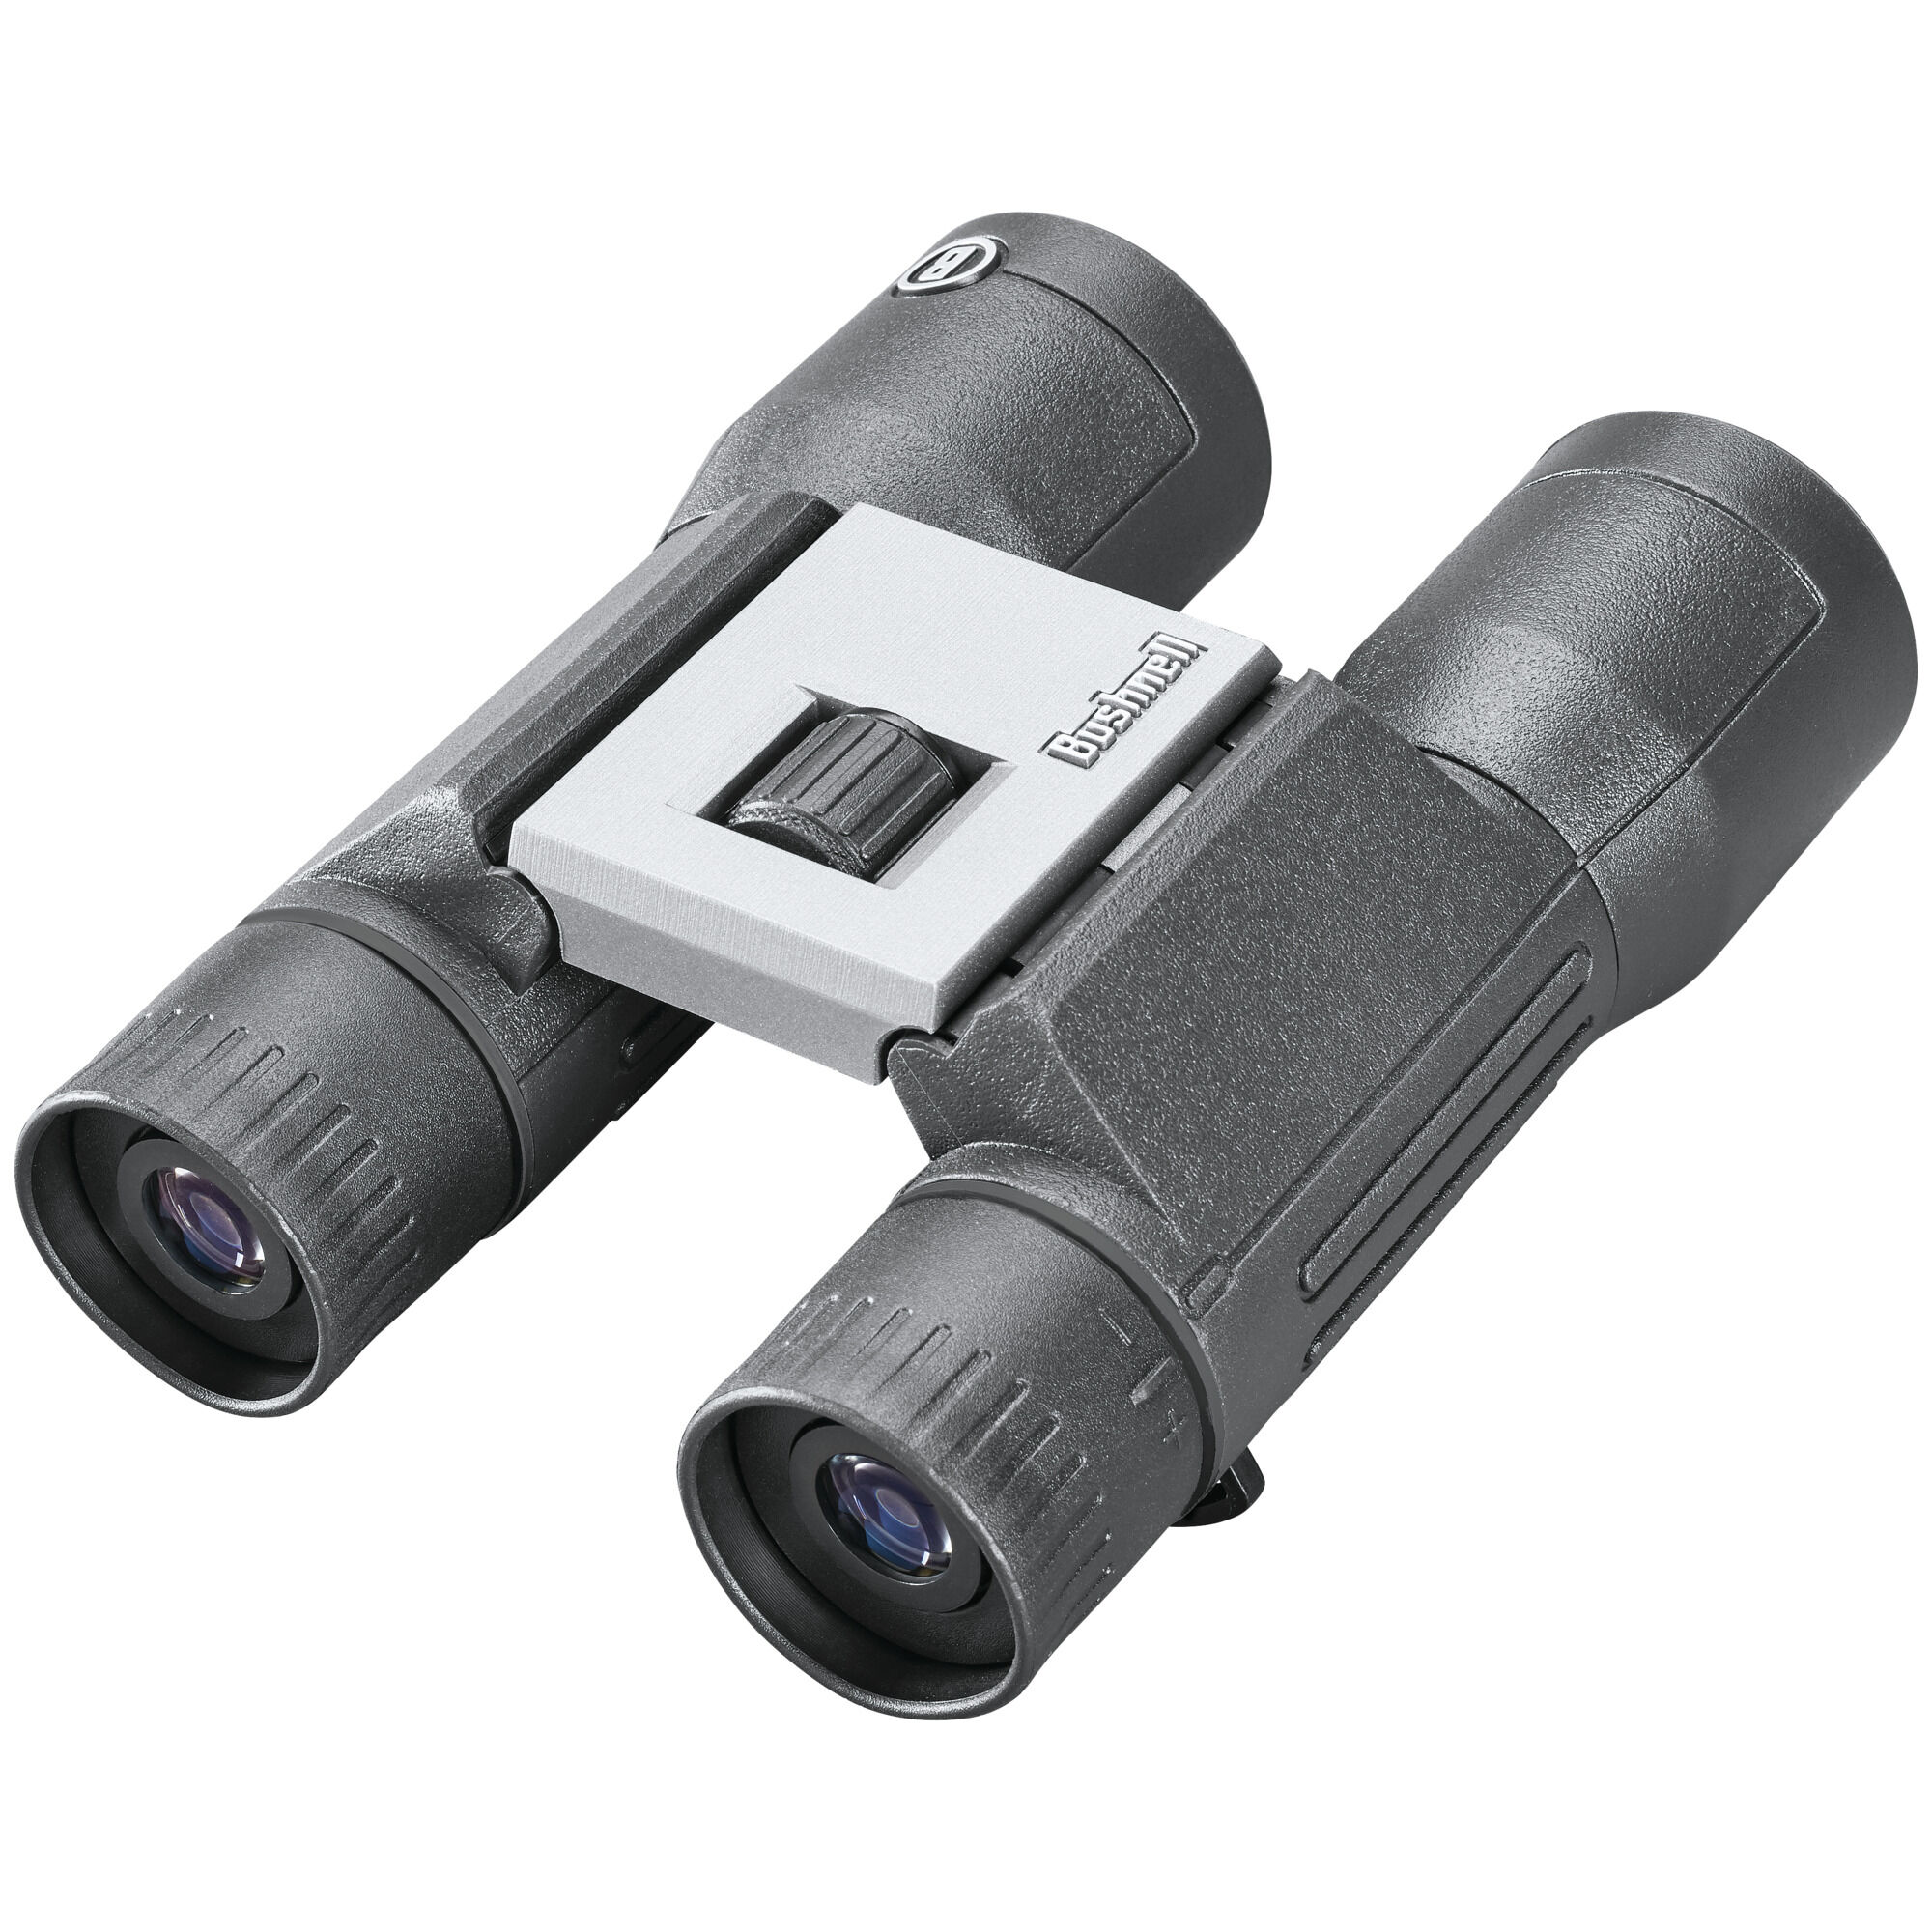 Powerview 2 Compact Binoculars, 16x32 Magnification| Bushnell